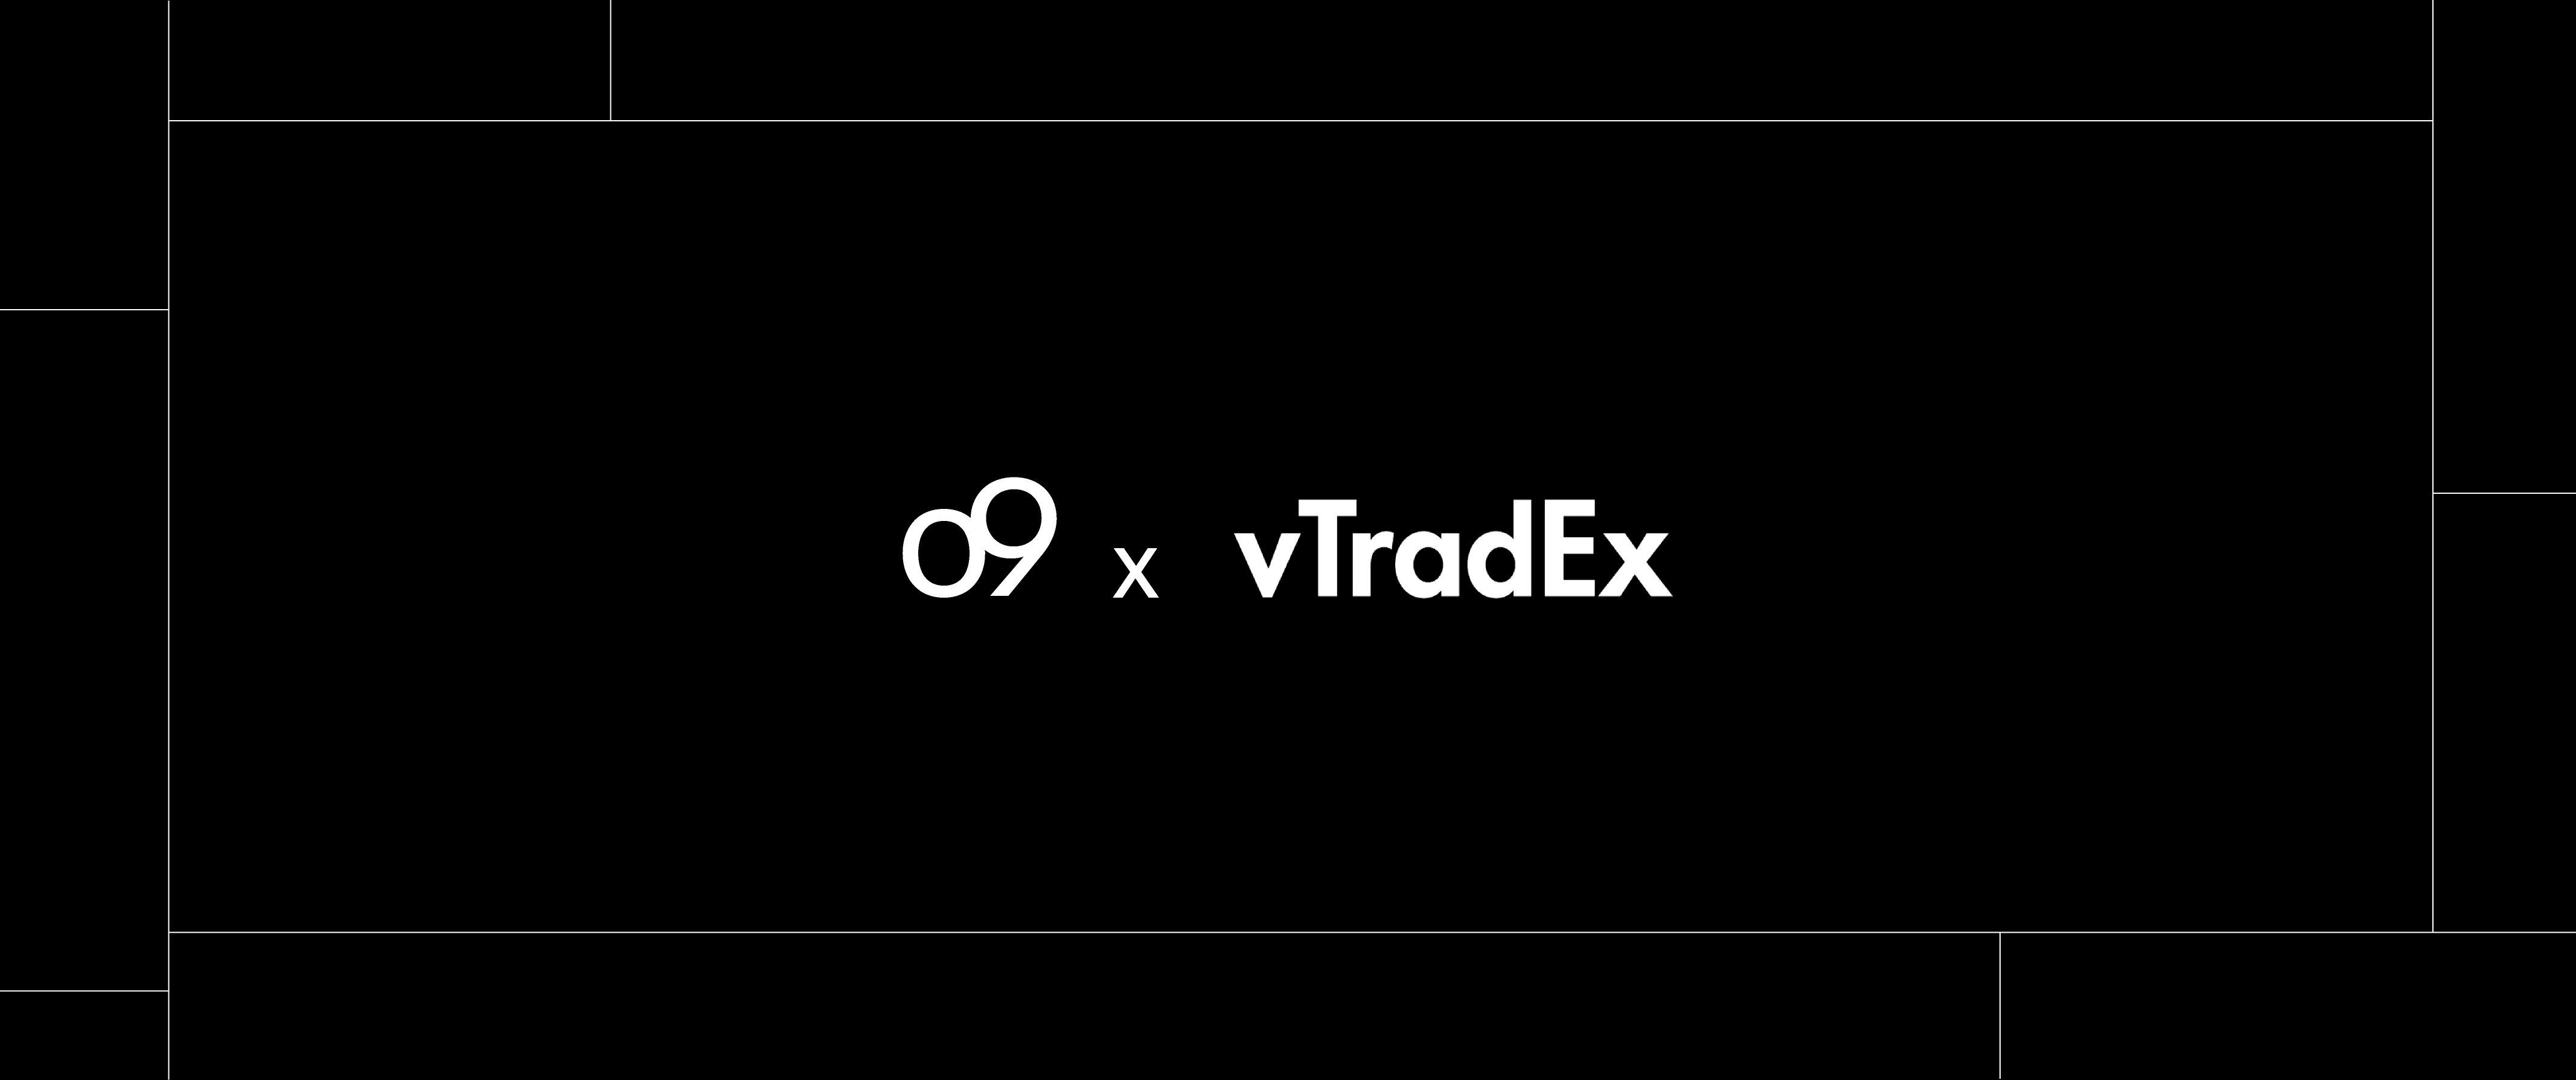 :o9 Solutions announces a strategic partnership with vTradEx to enter the Chinese market